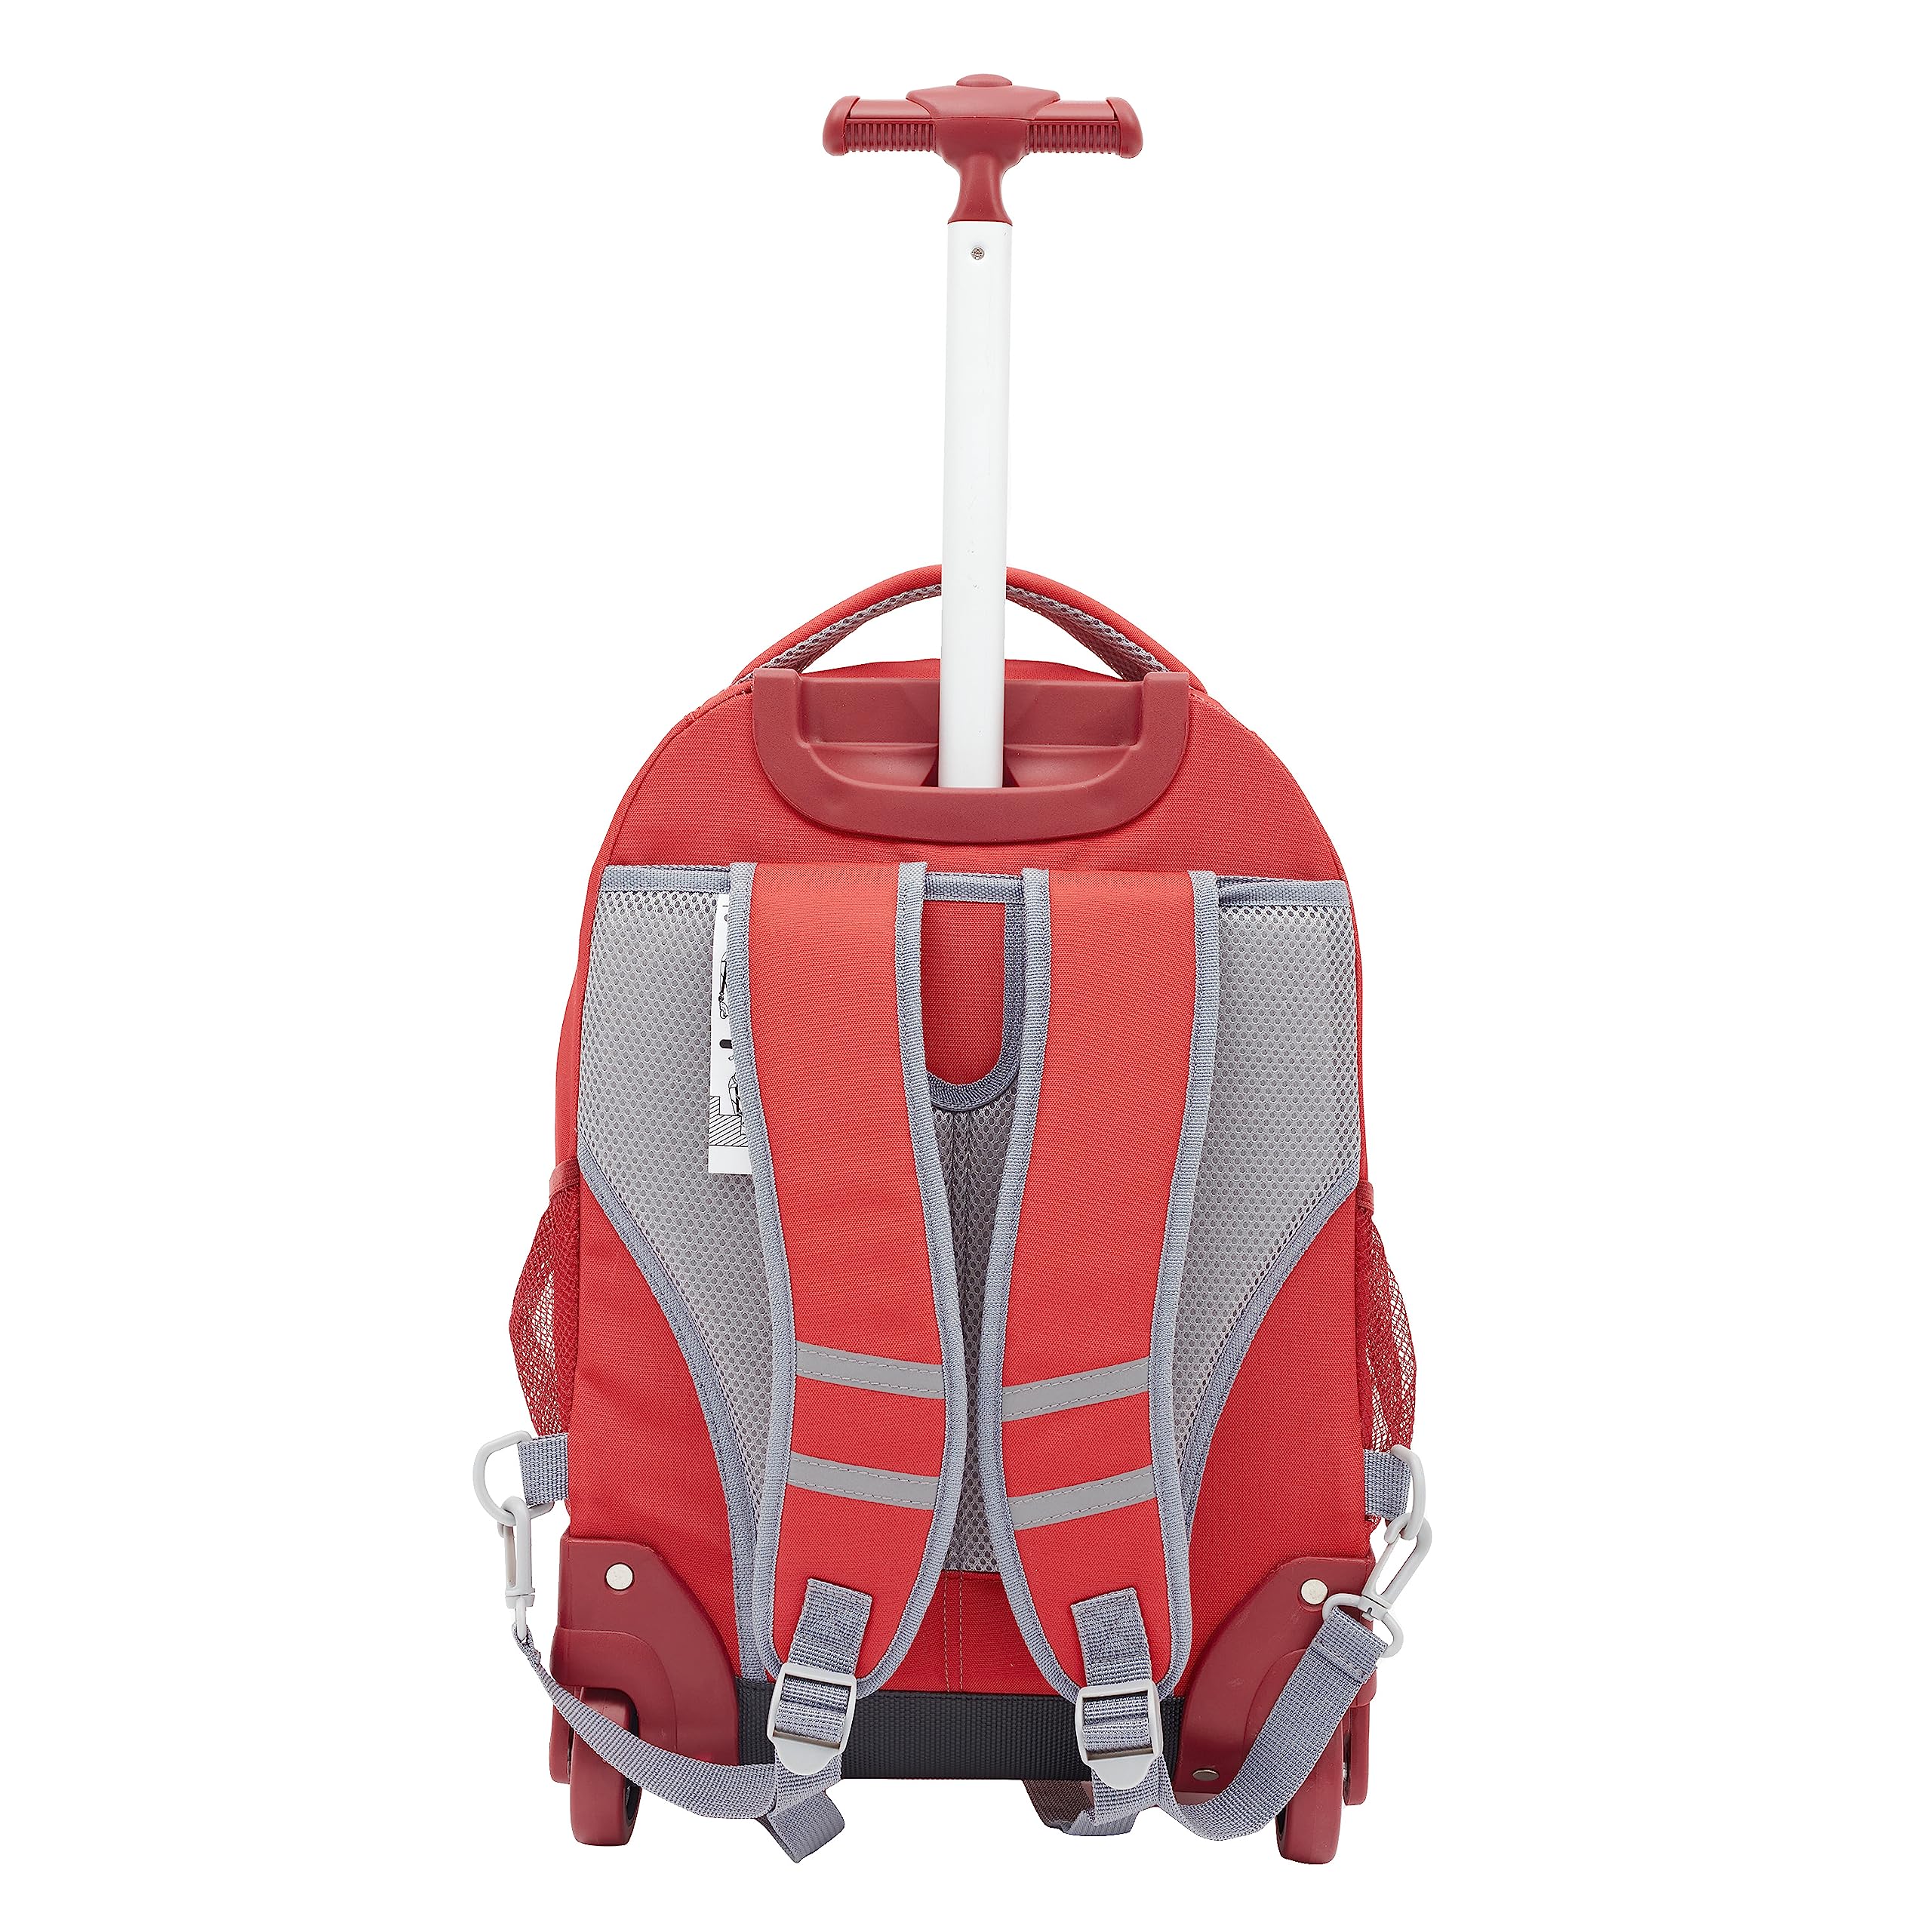 Travelers Club Rolling Backpack with Shoulder Straps, Red, 18-Inch